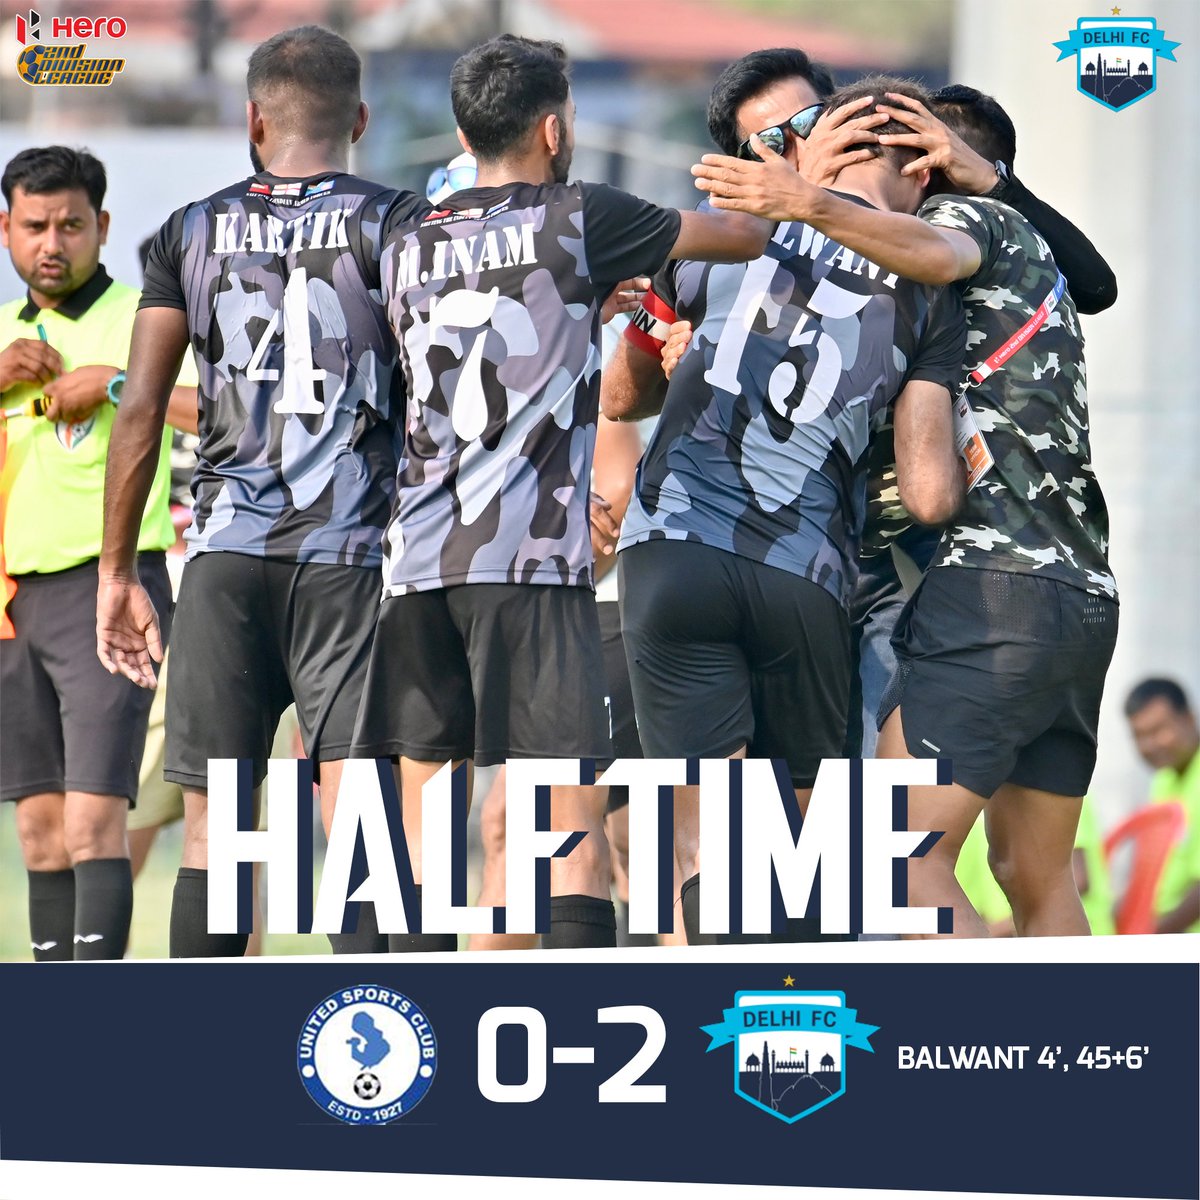 Balwant's brace in the first half is the difference between both sides. ⏸

Watch the match live:- youtube.com/live/InRc0bcOT…

USC 0-2 DFC

#DelhiFC #DilmeDilli #Hero2ndDiv #IndianFootball